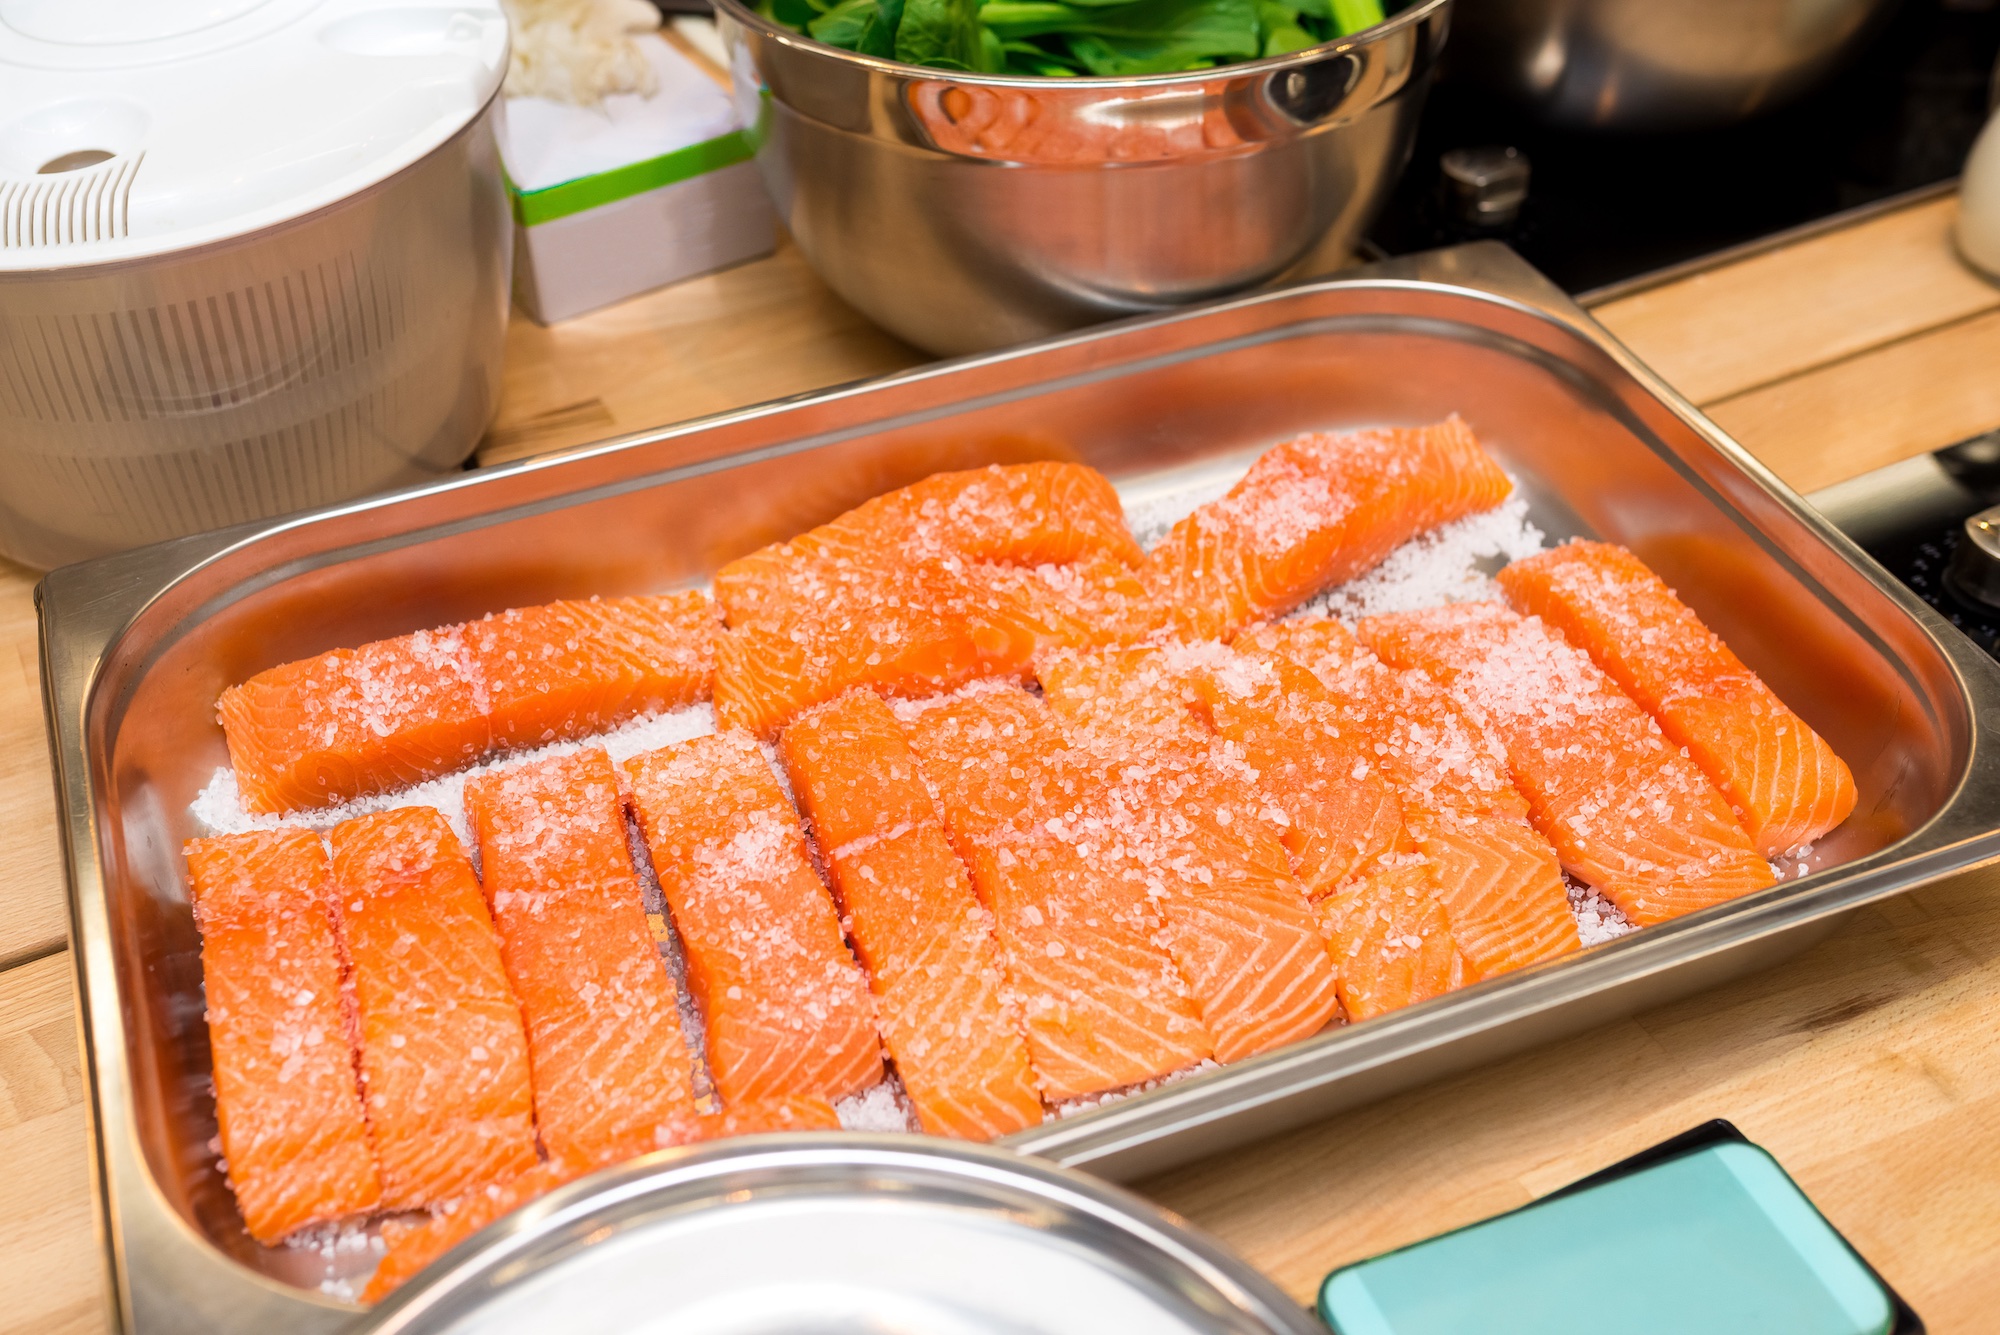 Salmon pieces are laid out in a kitchen baking tray